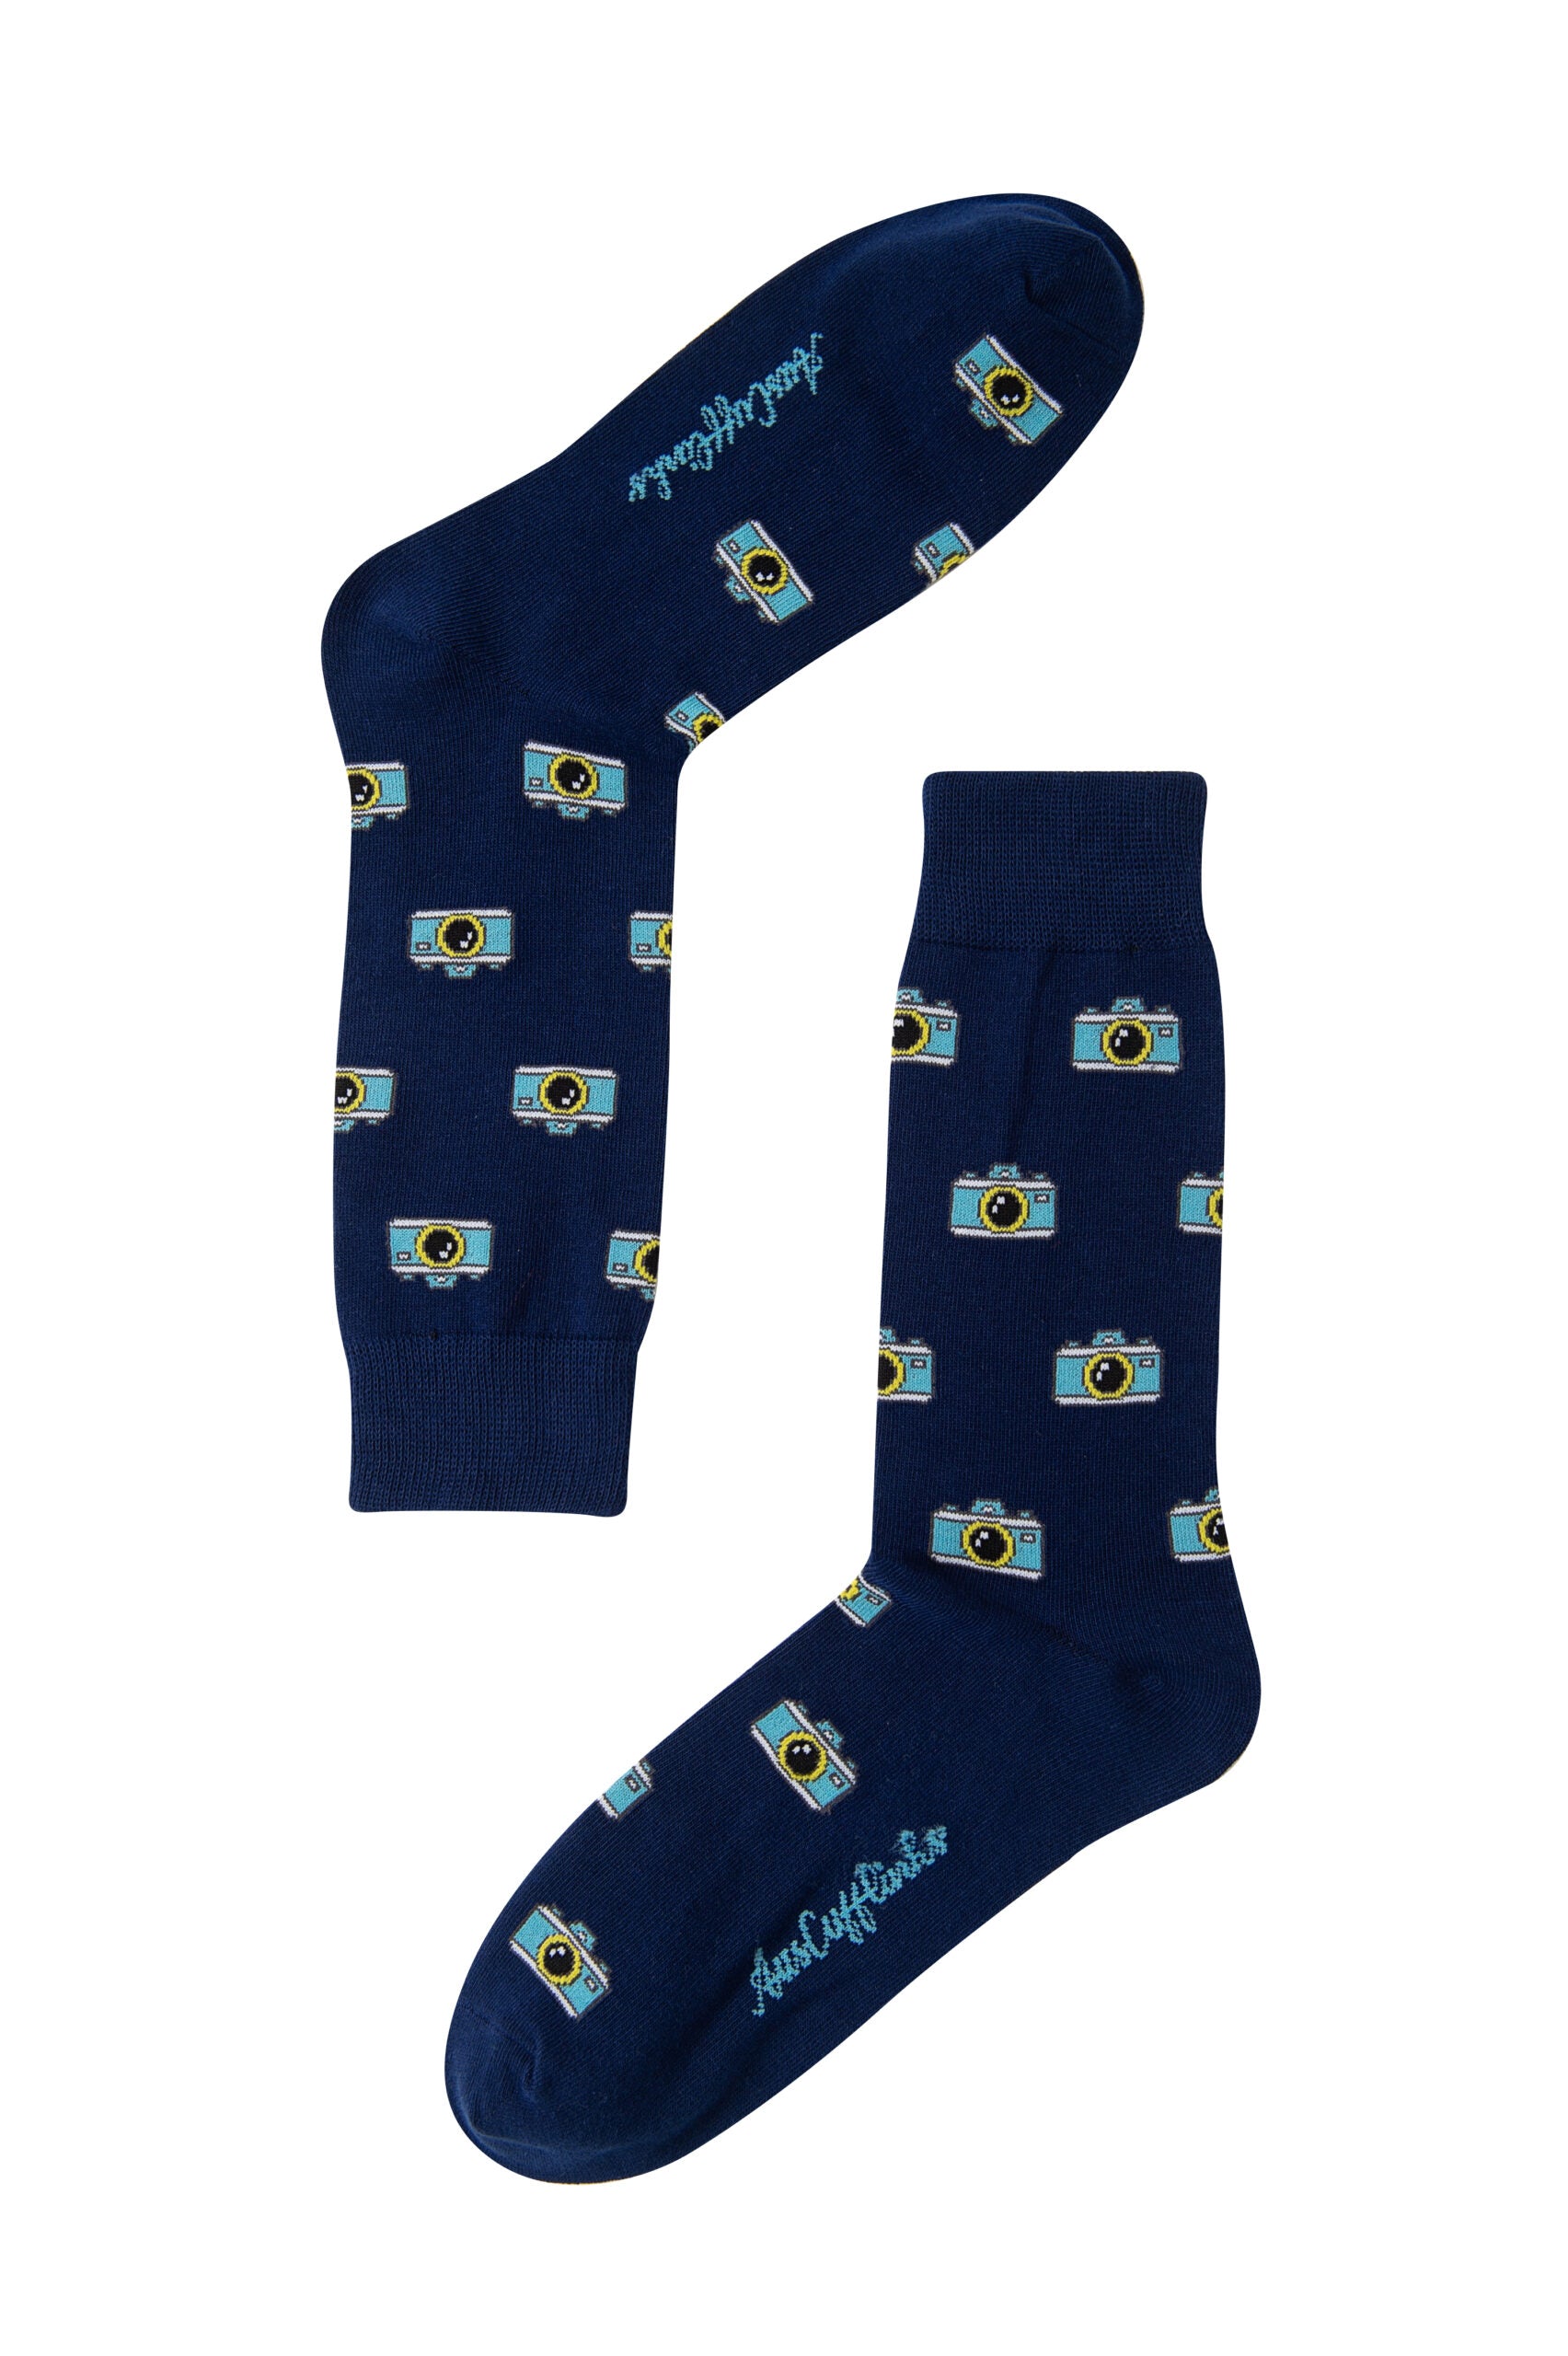 A pair of blue Camera Socks with camera designs.